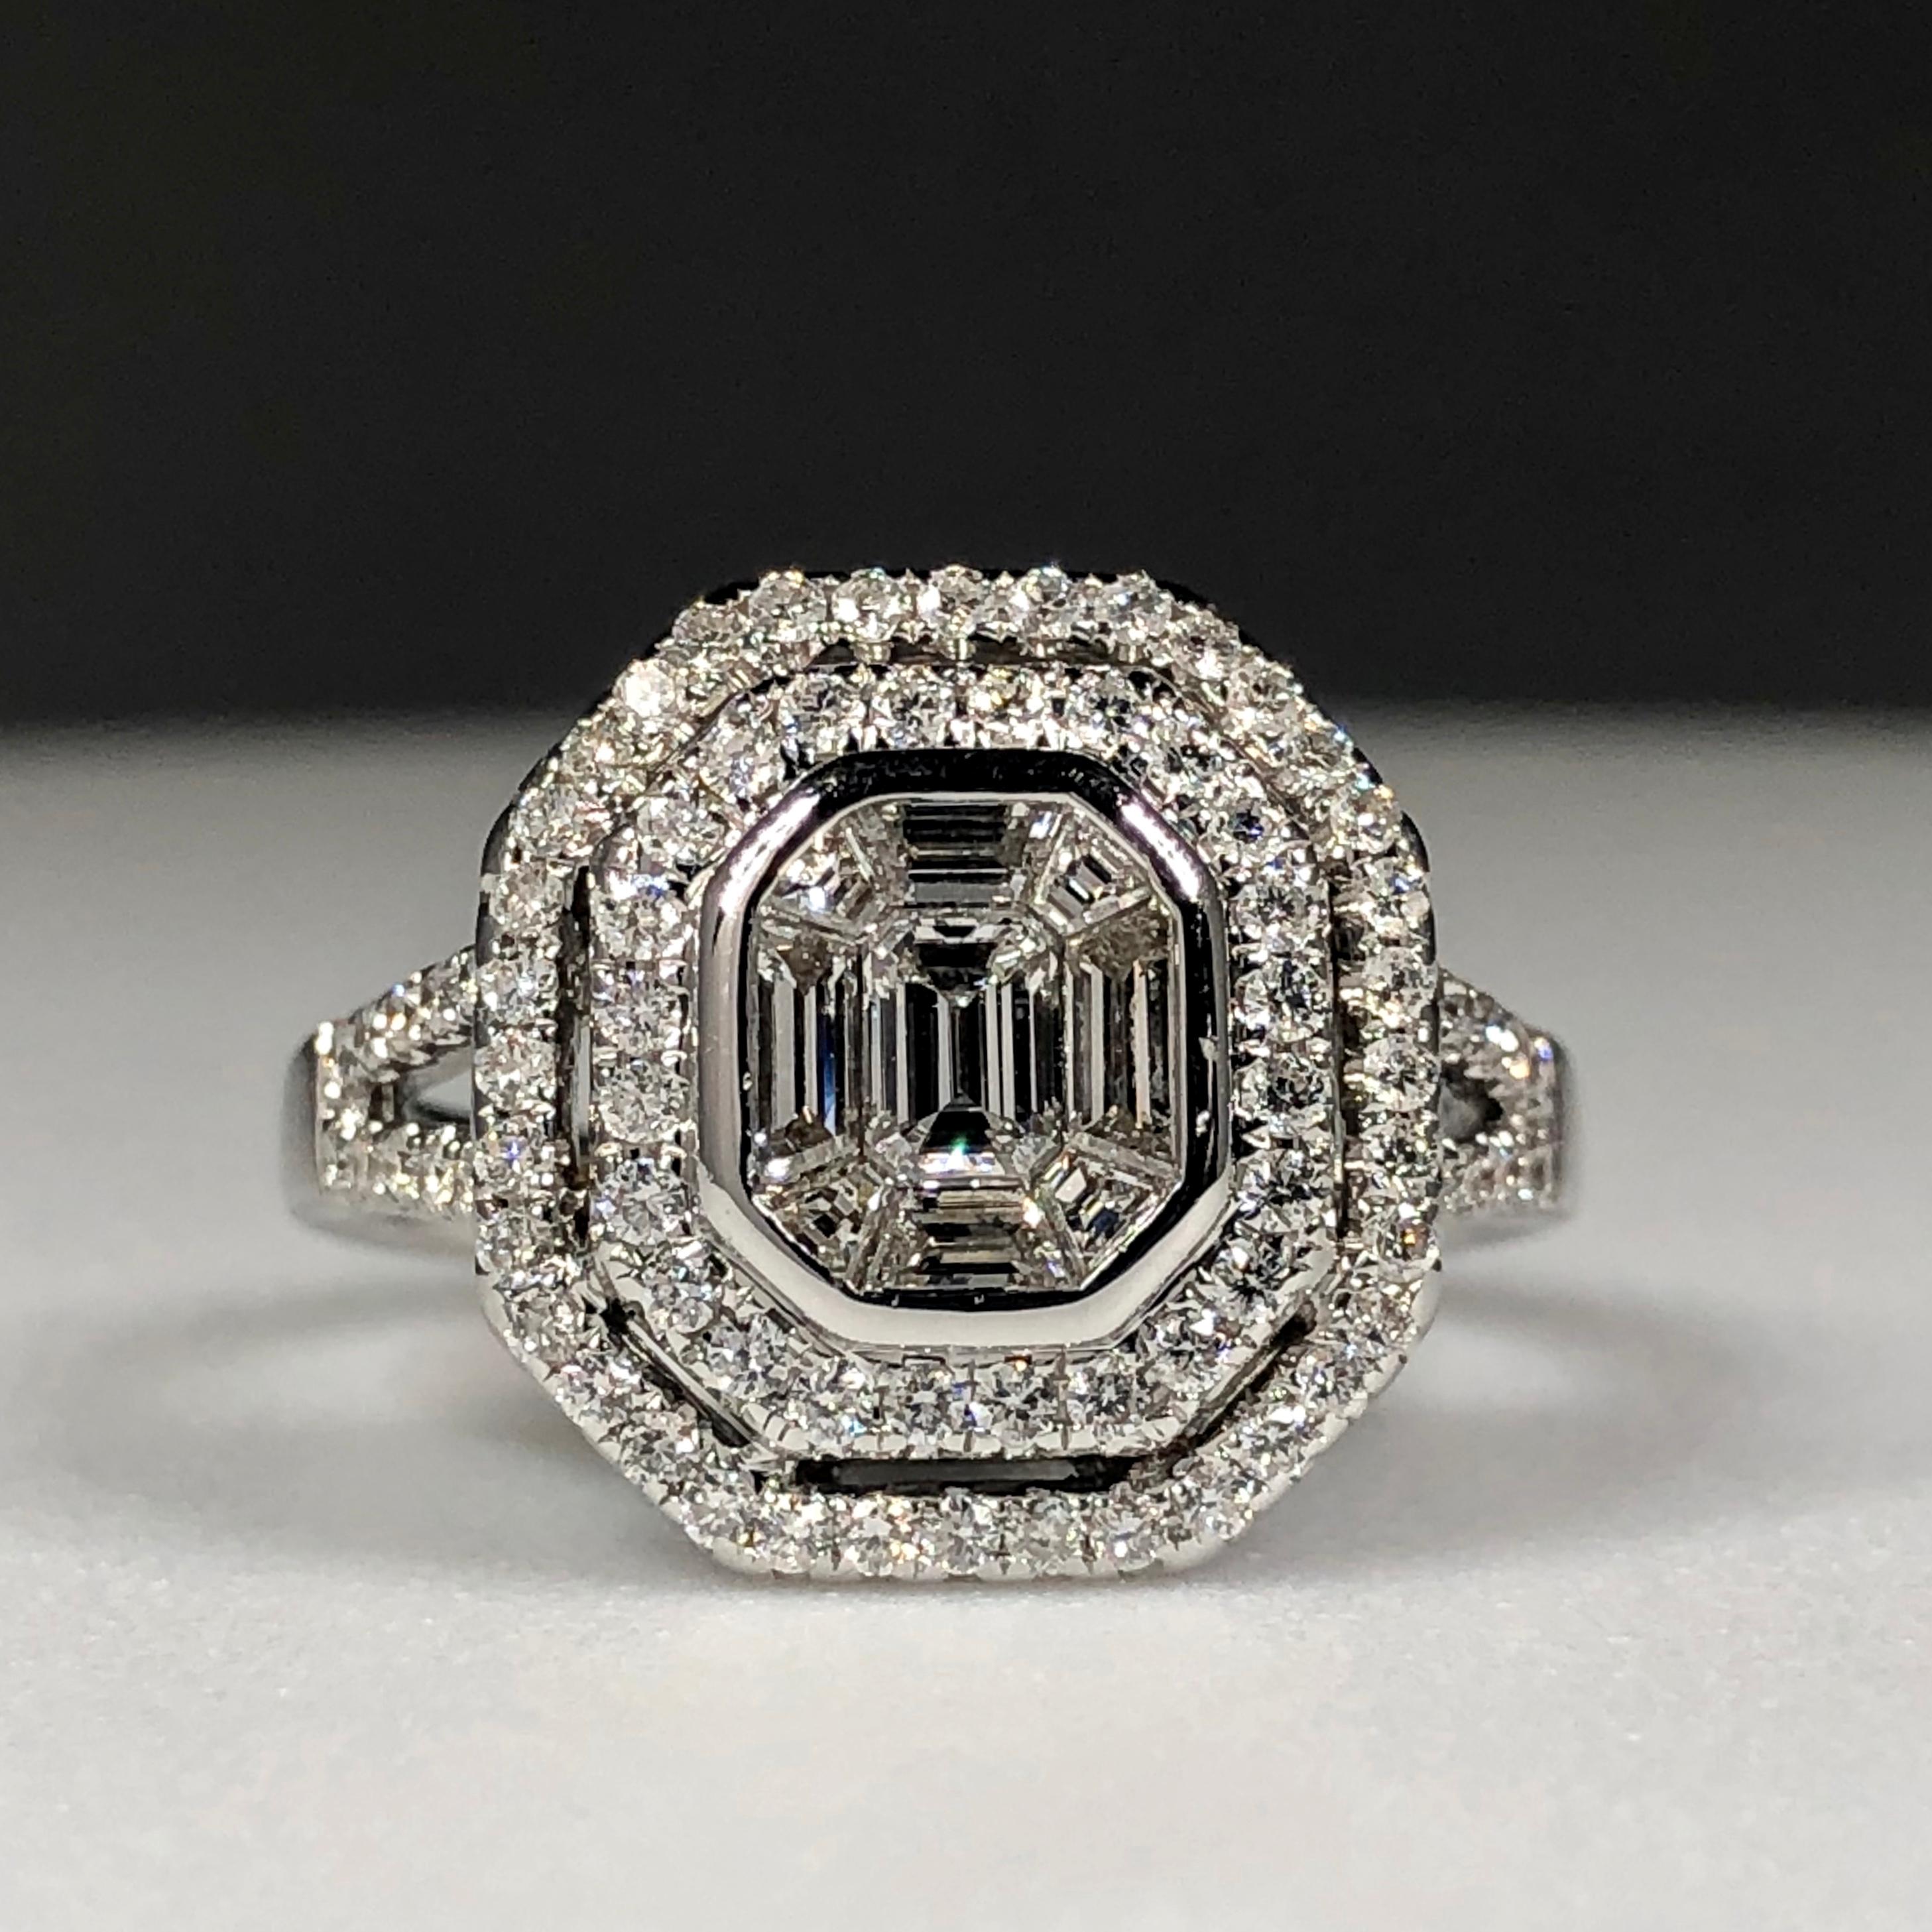 An 18K White Gold Cluster Cocktail Ring Set With An Estimated 1.50ct Of Diamonds 

The Central Illusion Set Baguettes Give The Visual Impression Of One Large Emerald Cut Diamond Surrounded By A Double Halo Of Round Brilliant Cut Bright White